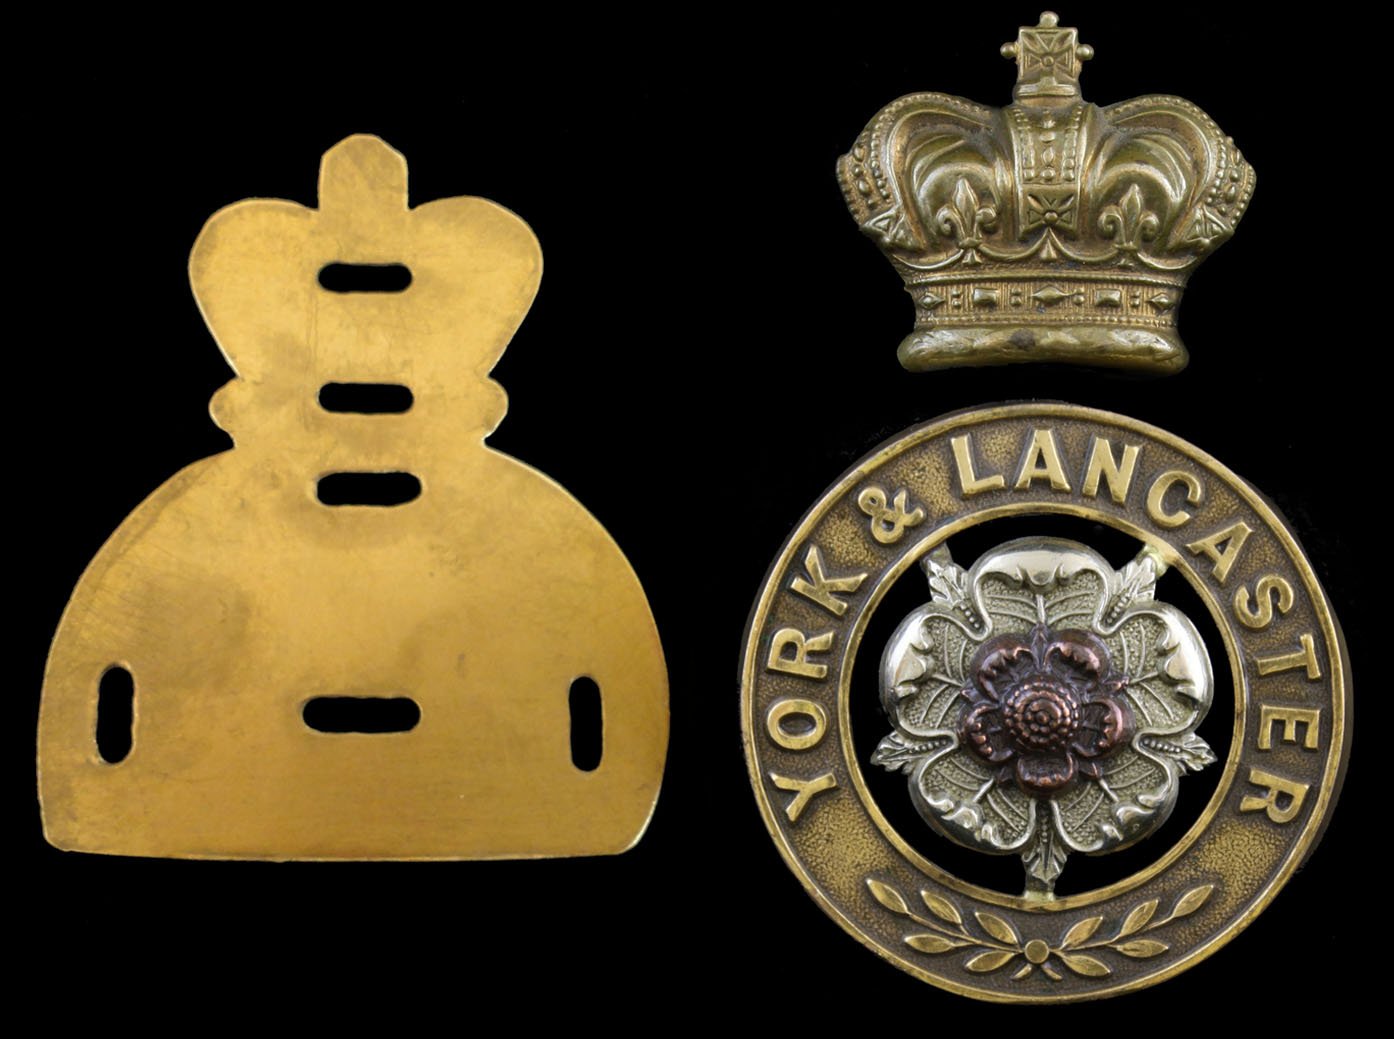 Regular Battalions Other Ranks Glengarry Badge Consisting of Backing Plate, HPC and Crown 1881 to 1901